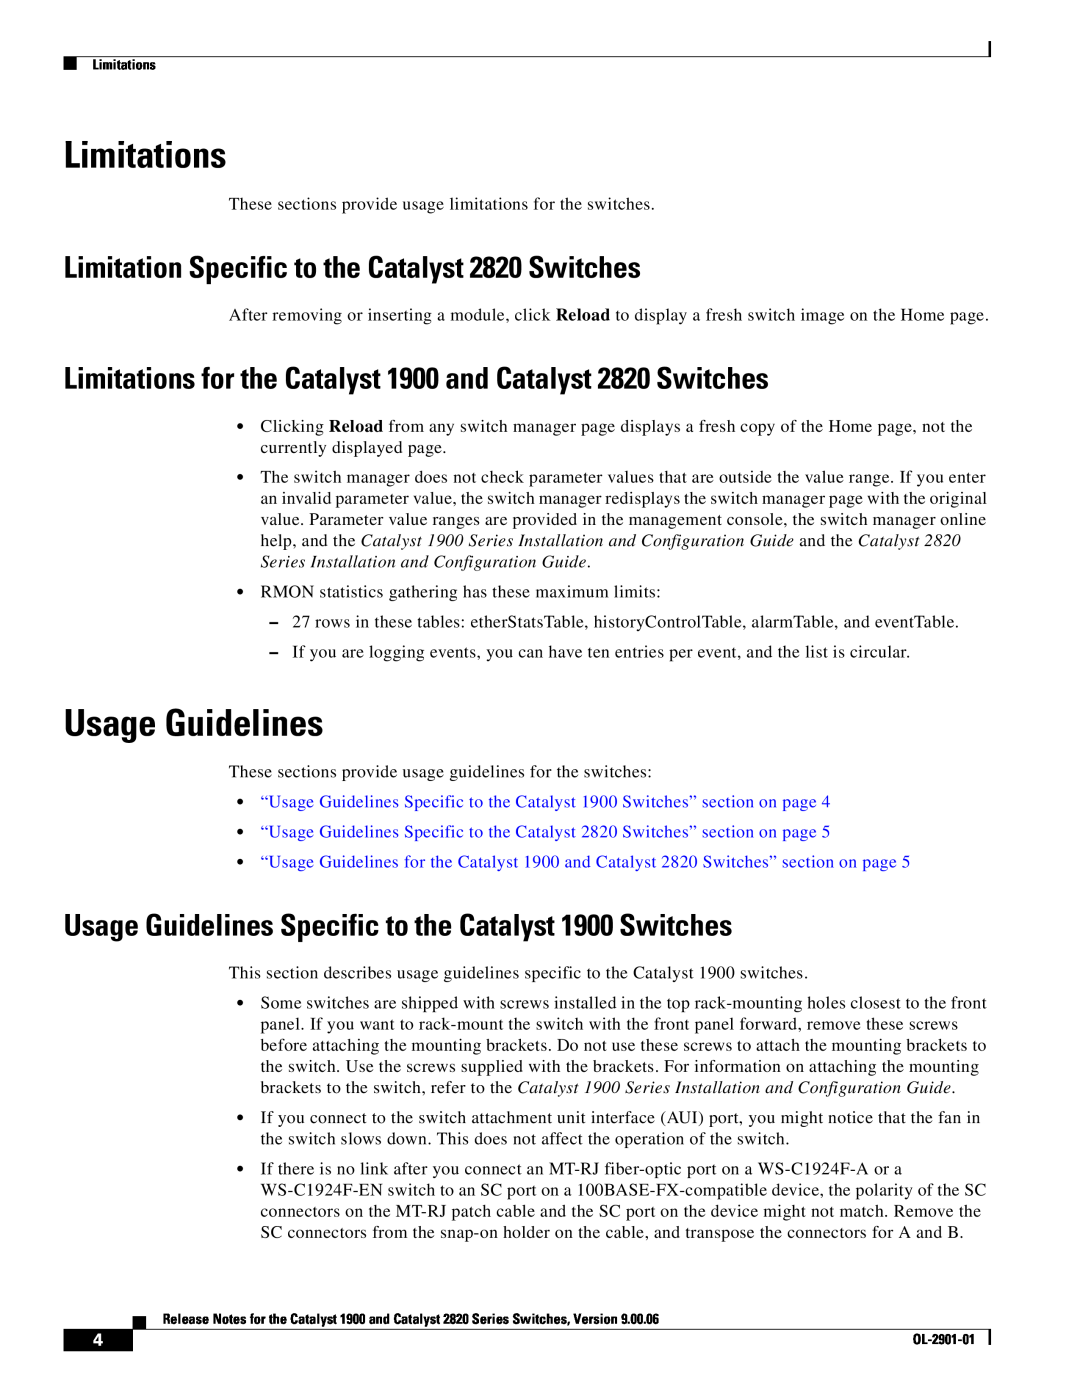 Cisco Systems 1900 manual Limitations, Usage Guidelines, Limitation Specific to the Catalyst 2820 Switches 